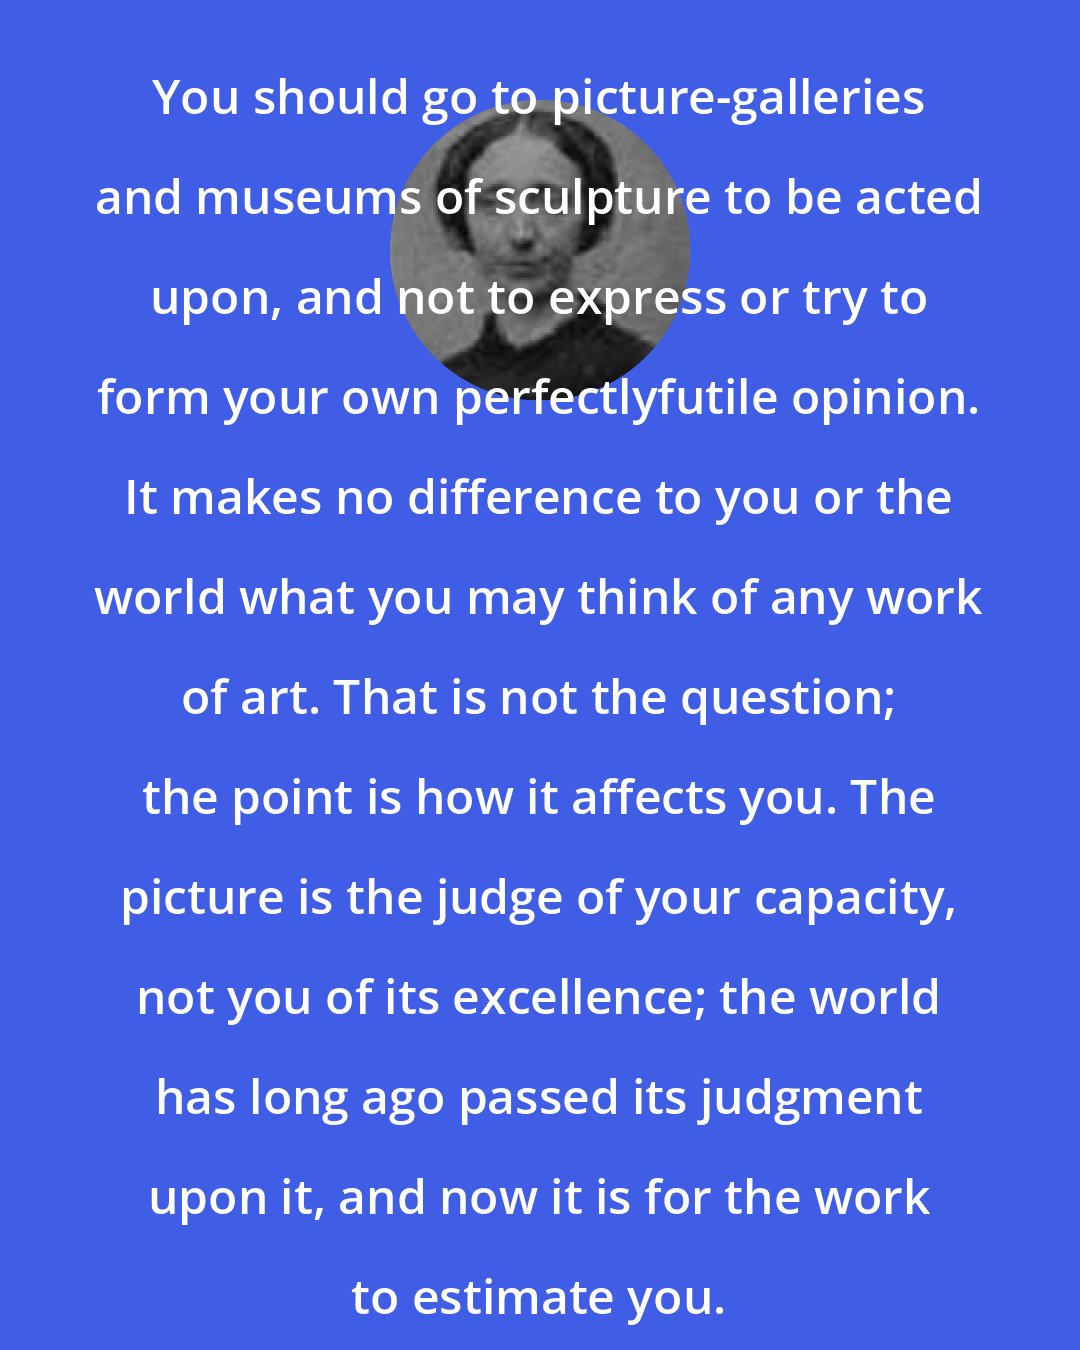 Anna Brackett: You should go to picture-galleries and museums of sculpture to be acted upon, and not to express or try to form your own perfectlyfutile opinion. It makes no difference to you or the world what you may think of any work of art. That is not the question; the point is how it affects you. The picture is the judge of your capacity, not you of its excellence; the world has long ago passed its judgment upon it, and now it is for the work to estimate you.